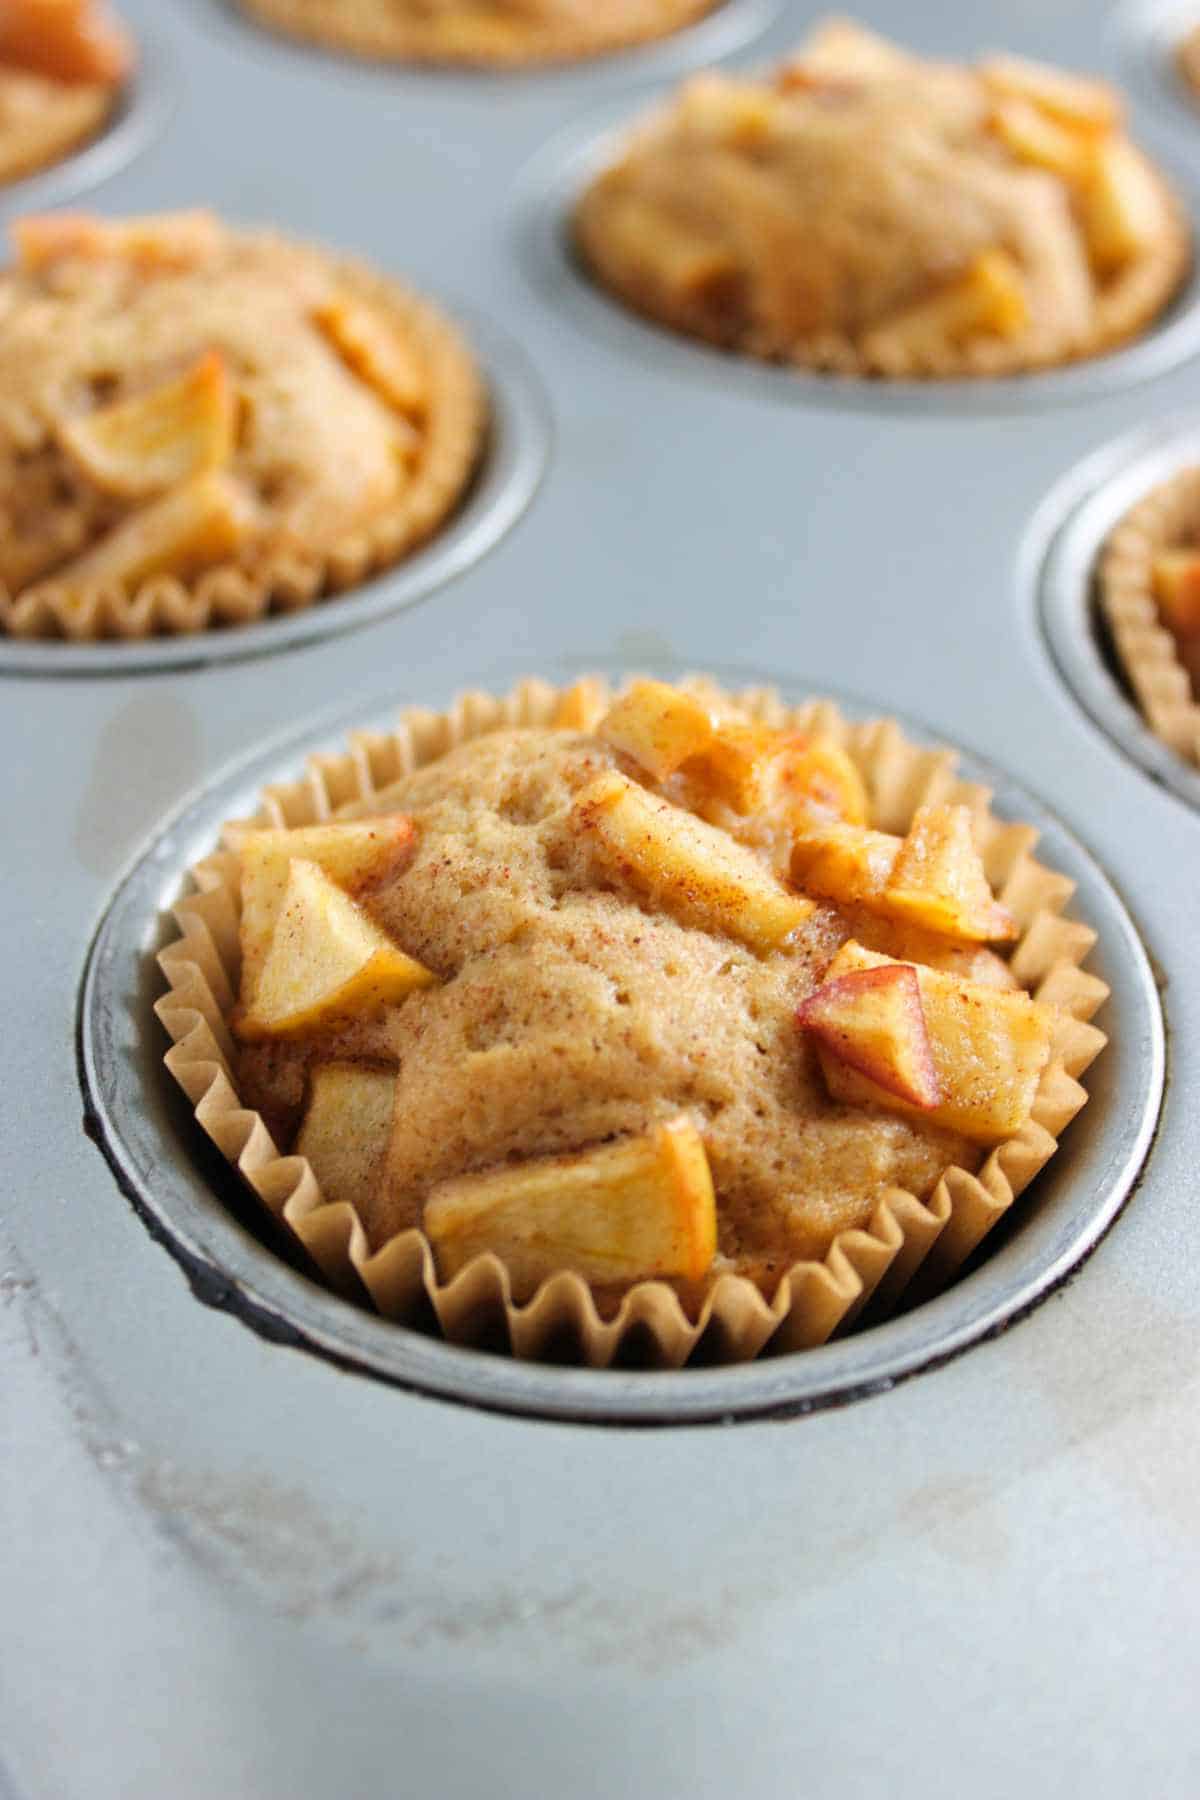 baked cupcakes with apple filling on top.